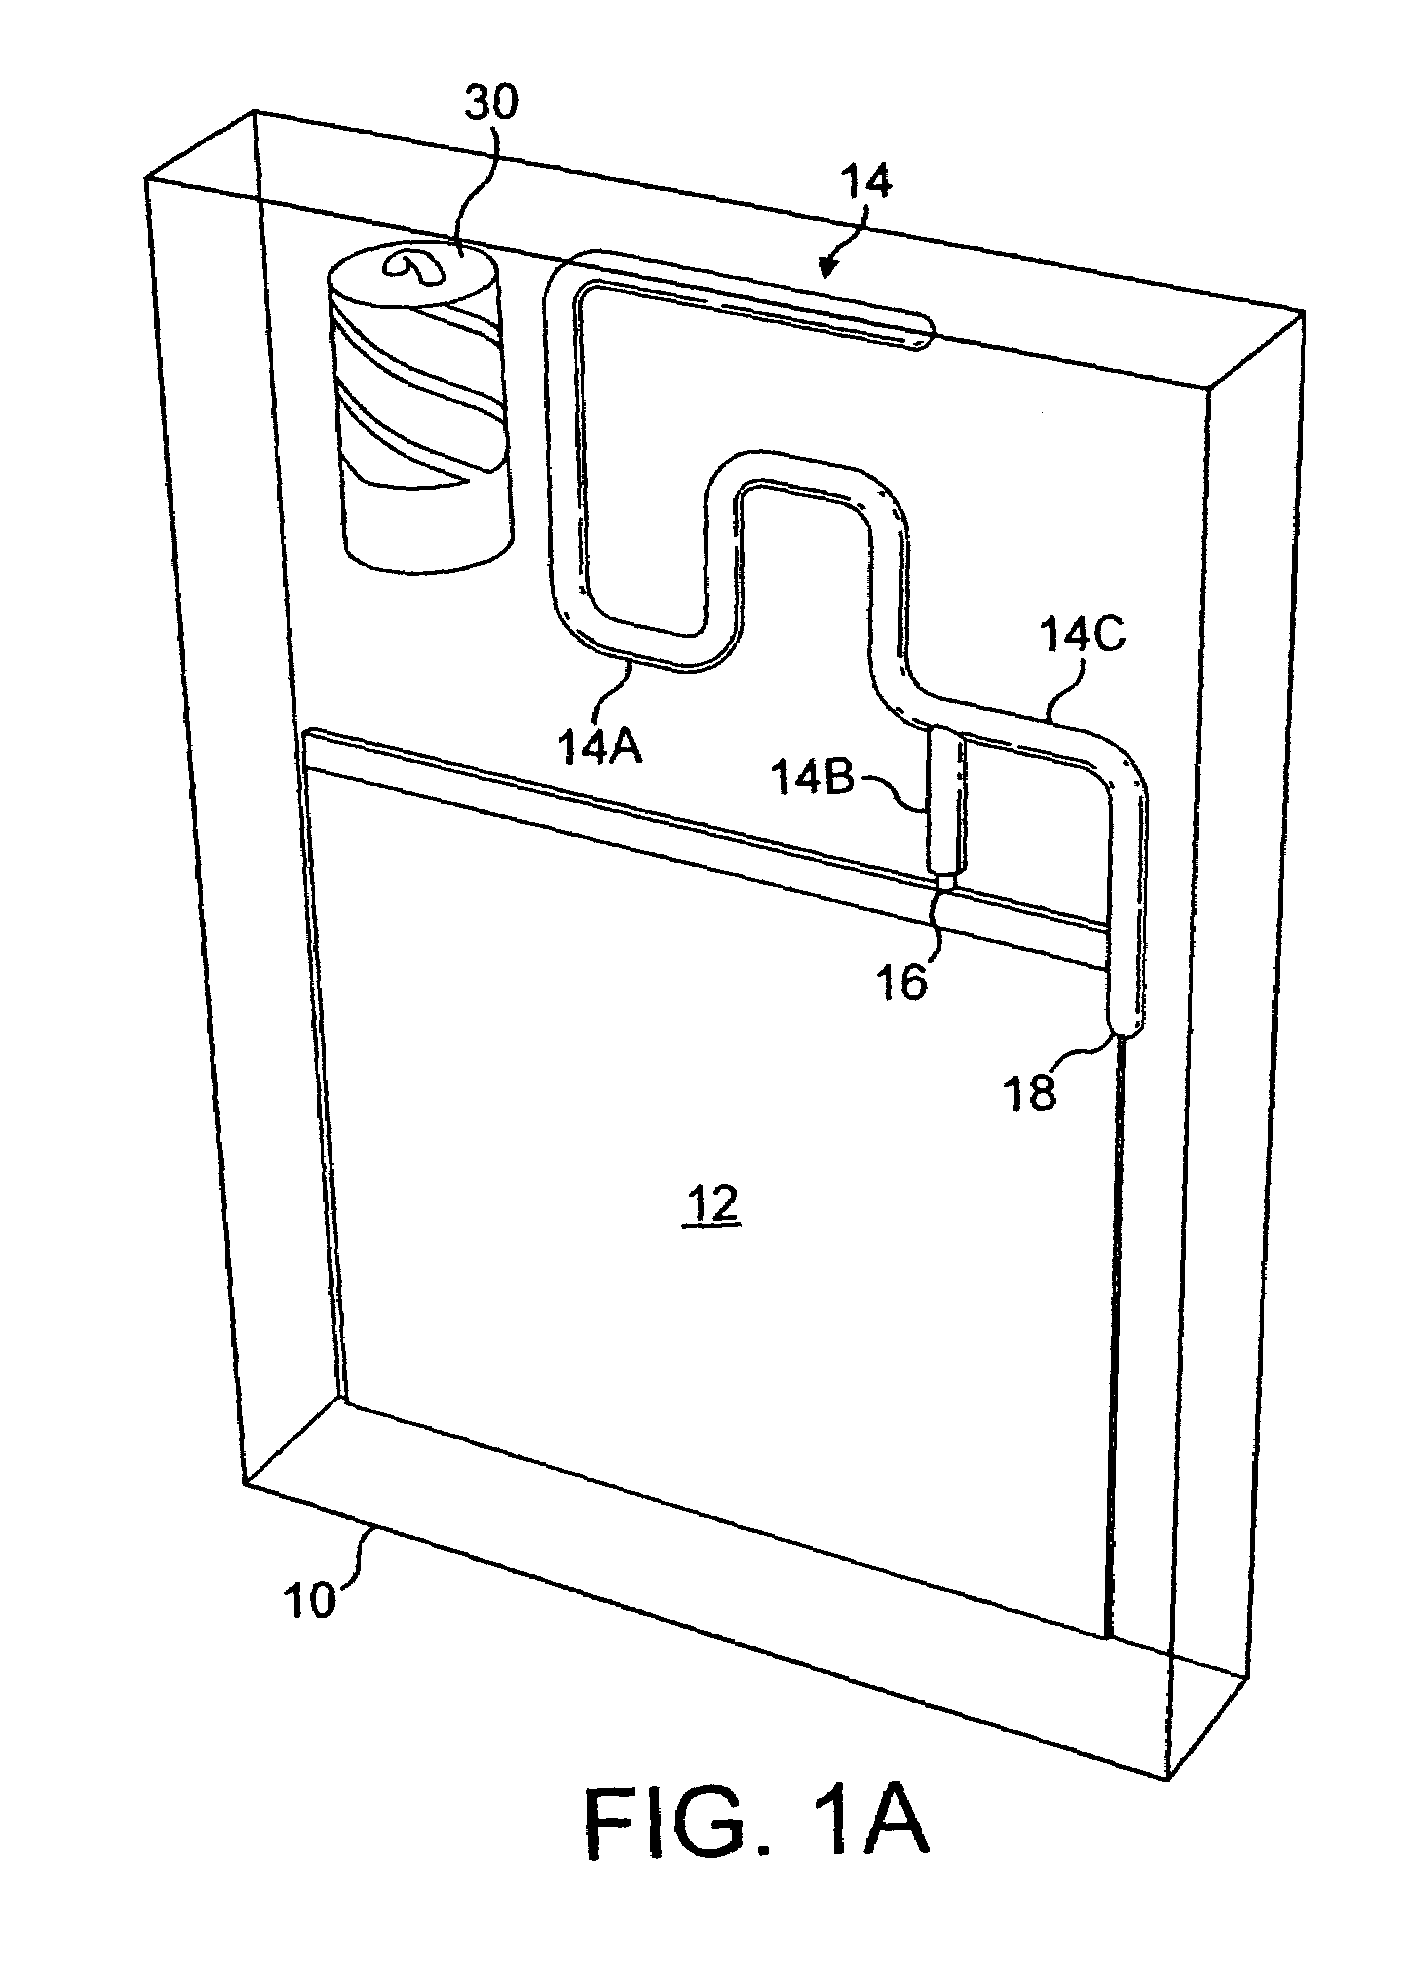 Mobile communication device and an antenna assembly for the device